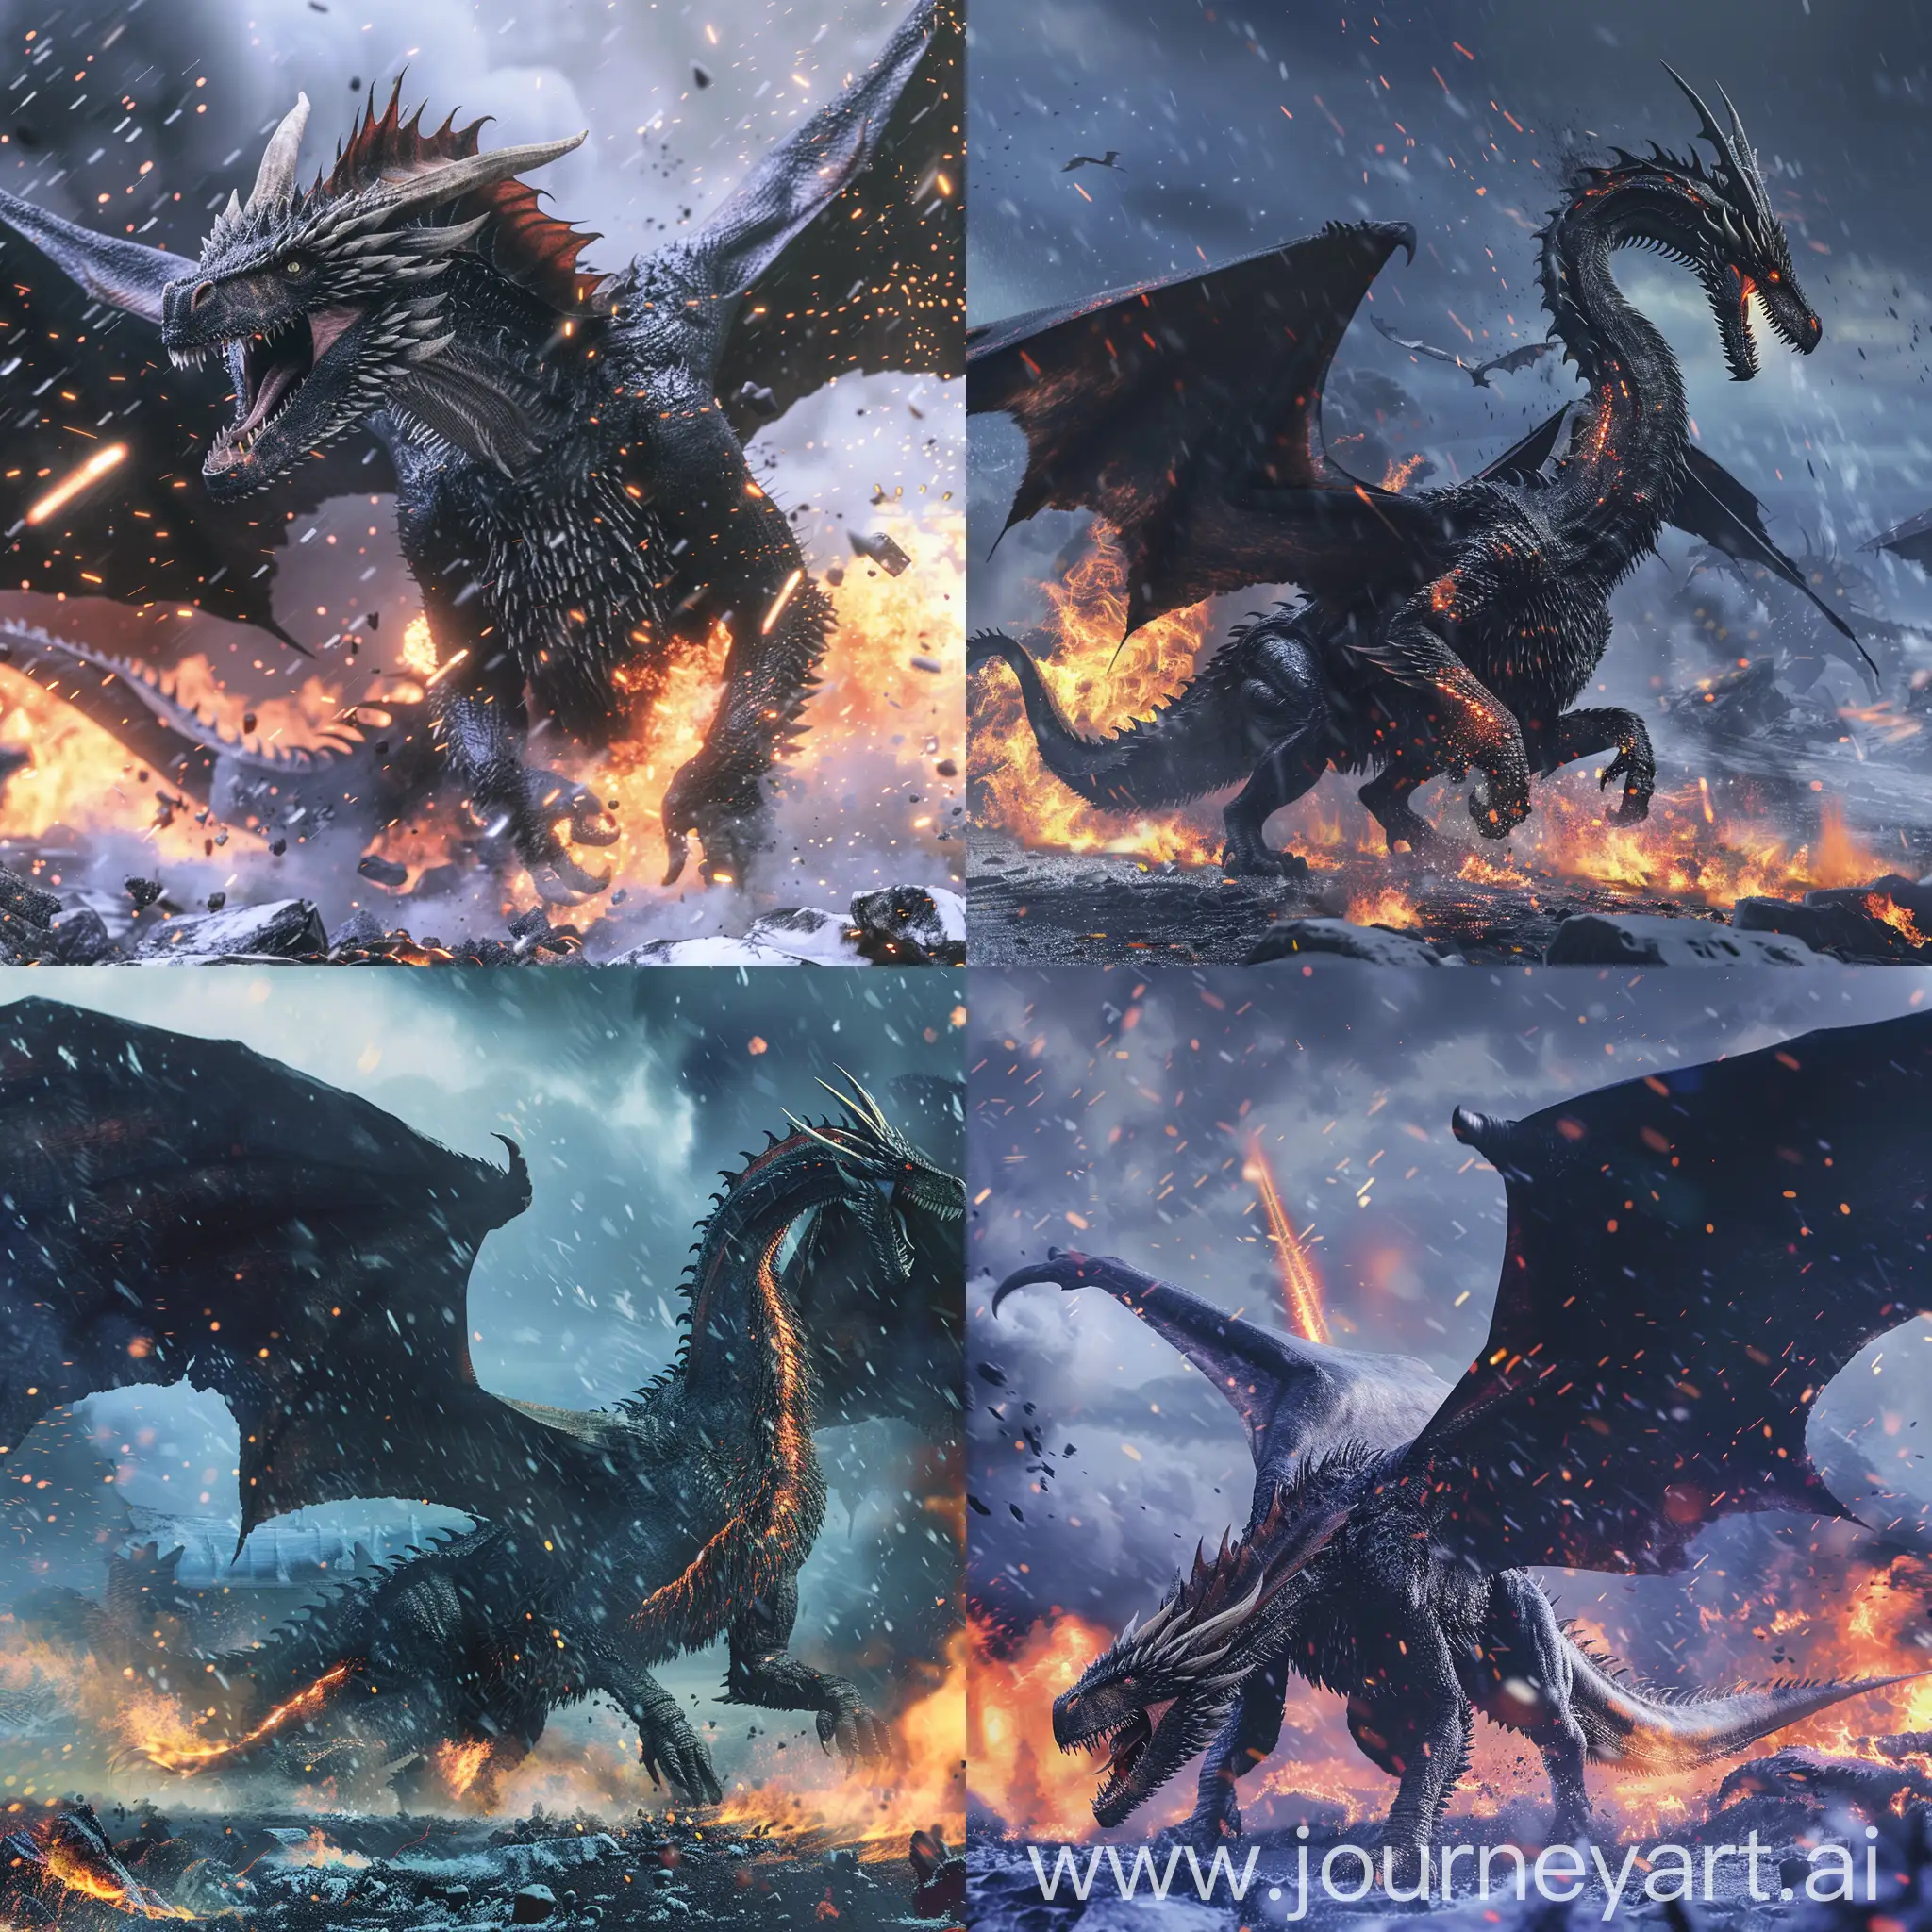 Balerion-Dragon-Ravaging-Kingsland-in-Snow-and-Ice-Storm